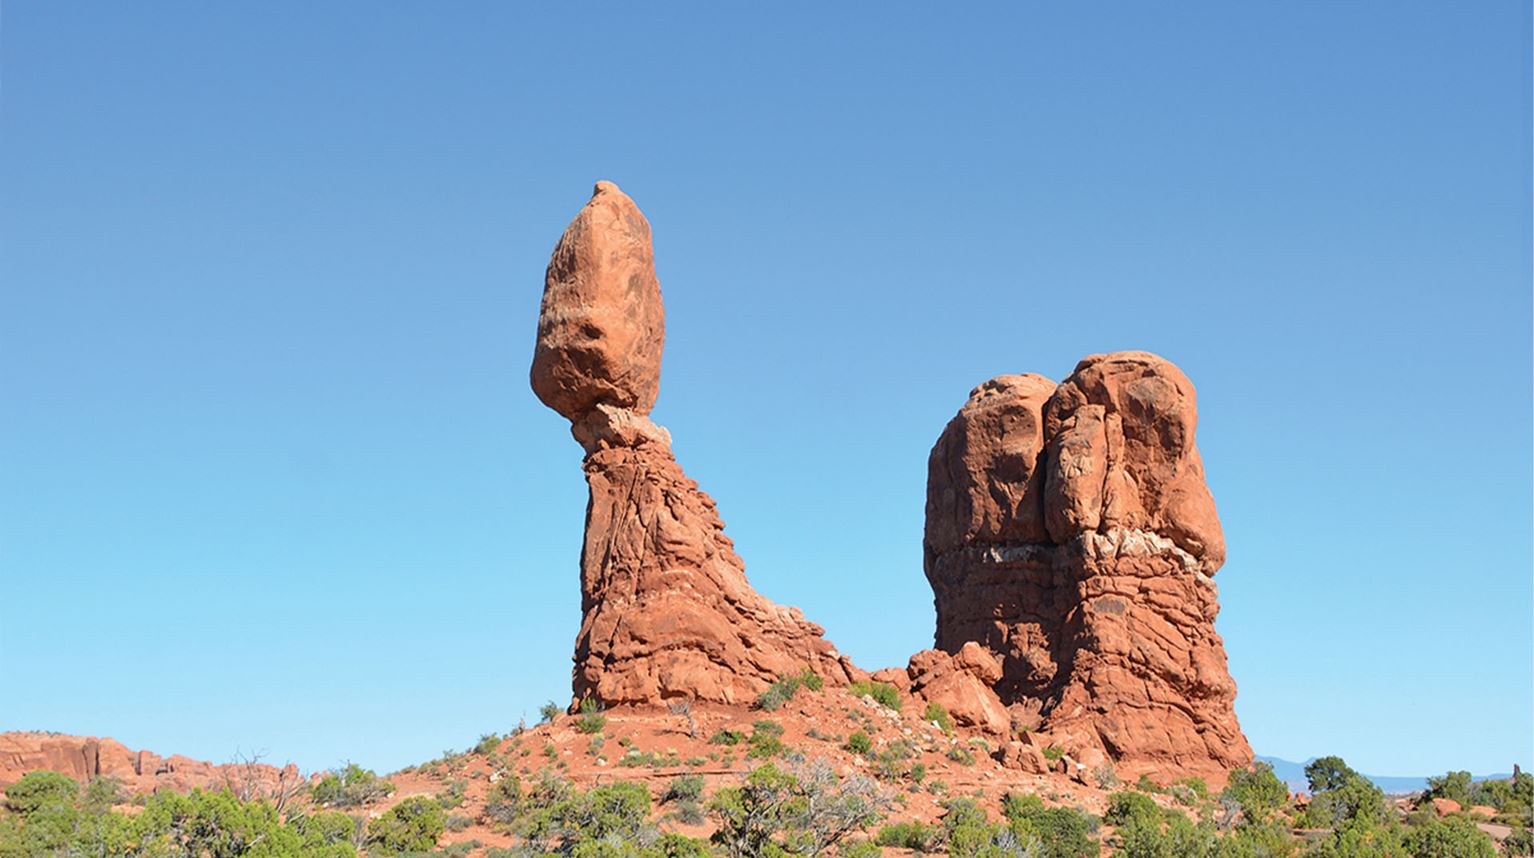 View of the Balanced Rock at Arches National Park, Utah